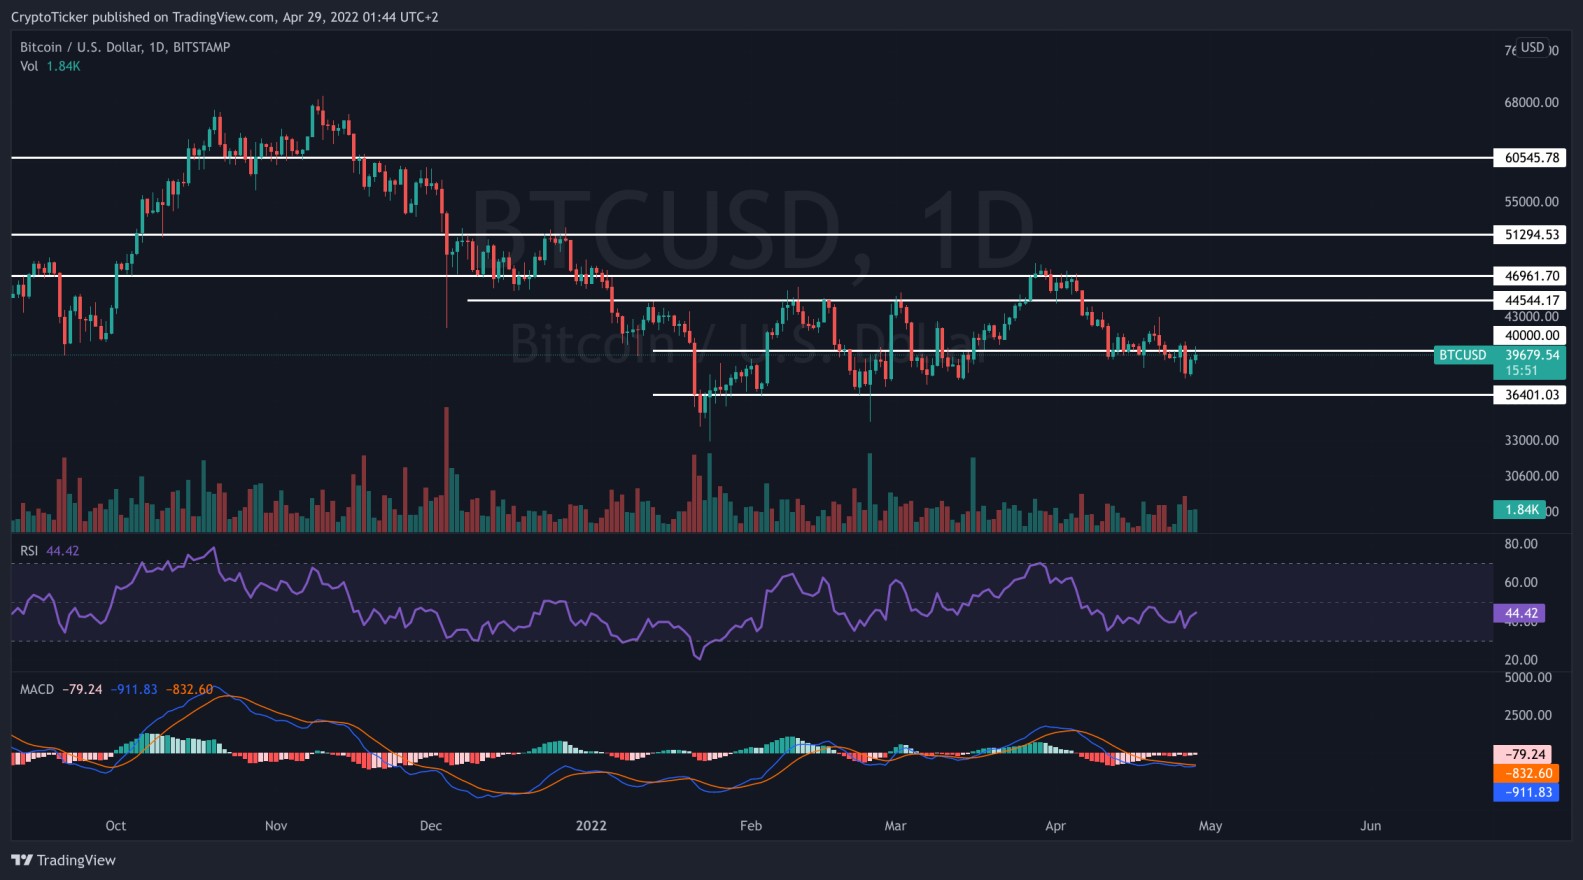 BTC/USD 1-day chart showing the important levels of Bitcoin